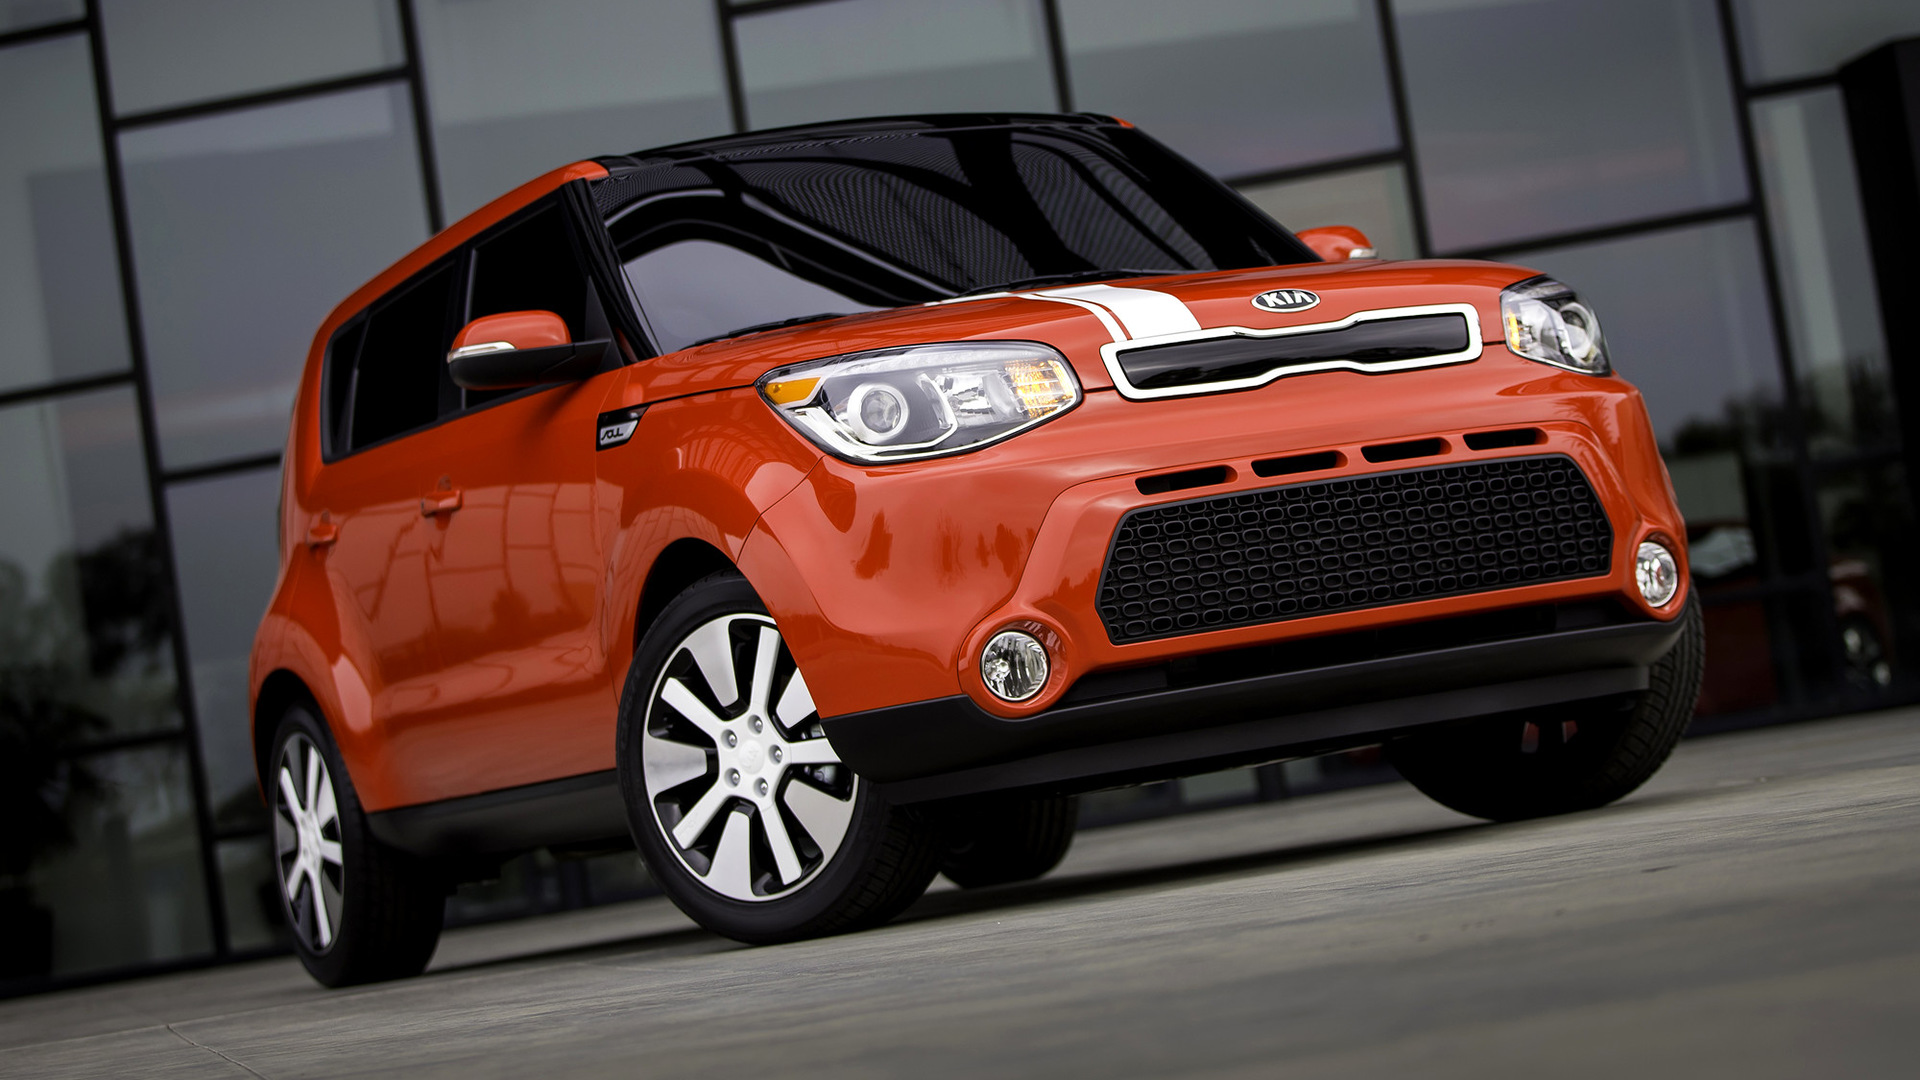 2013 Kia Soul (US) - Wallpapers and HD Images | Car Pixel